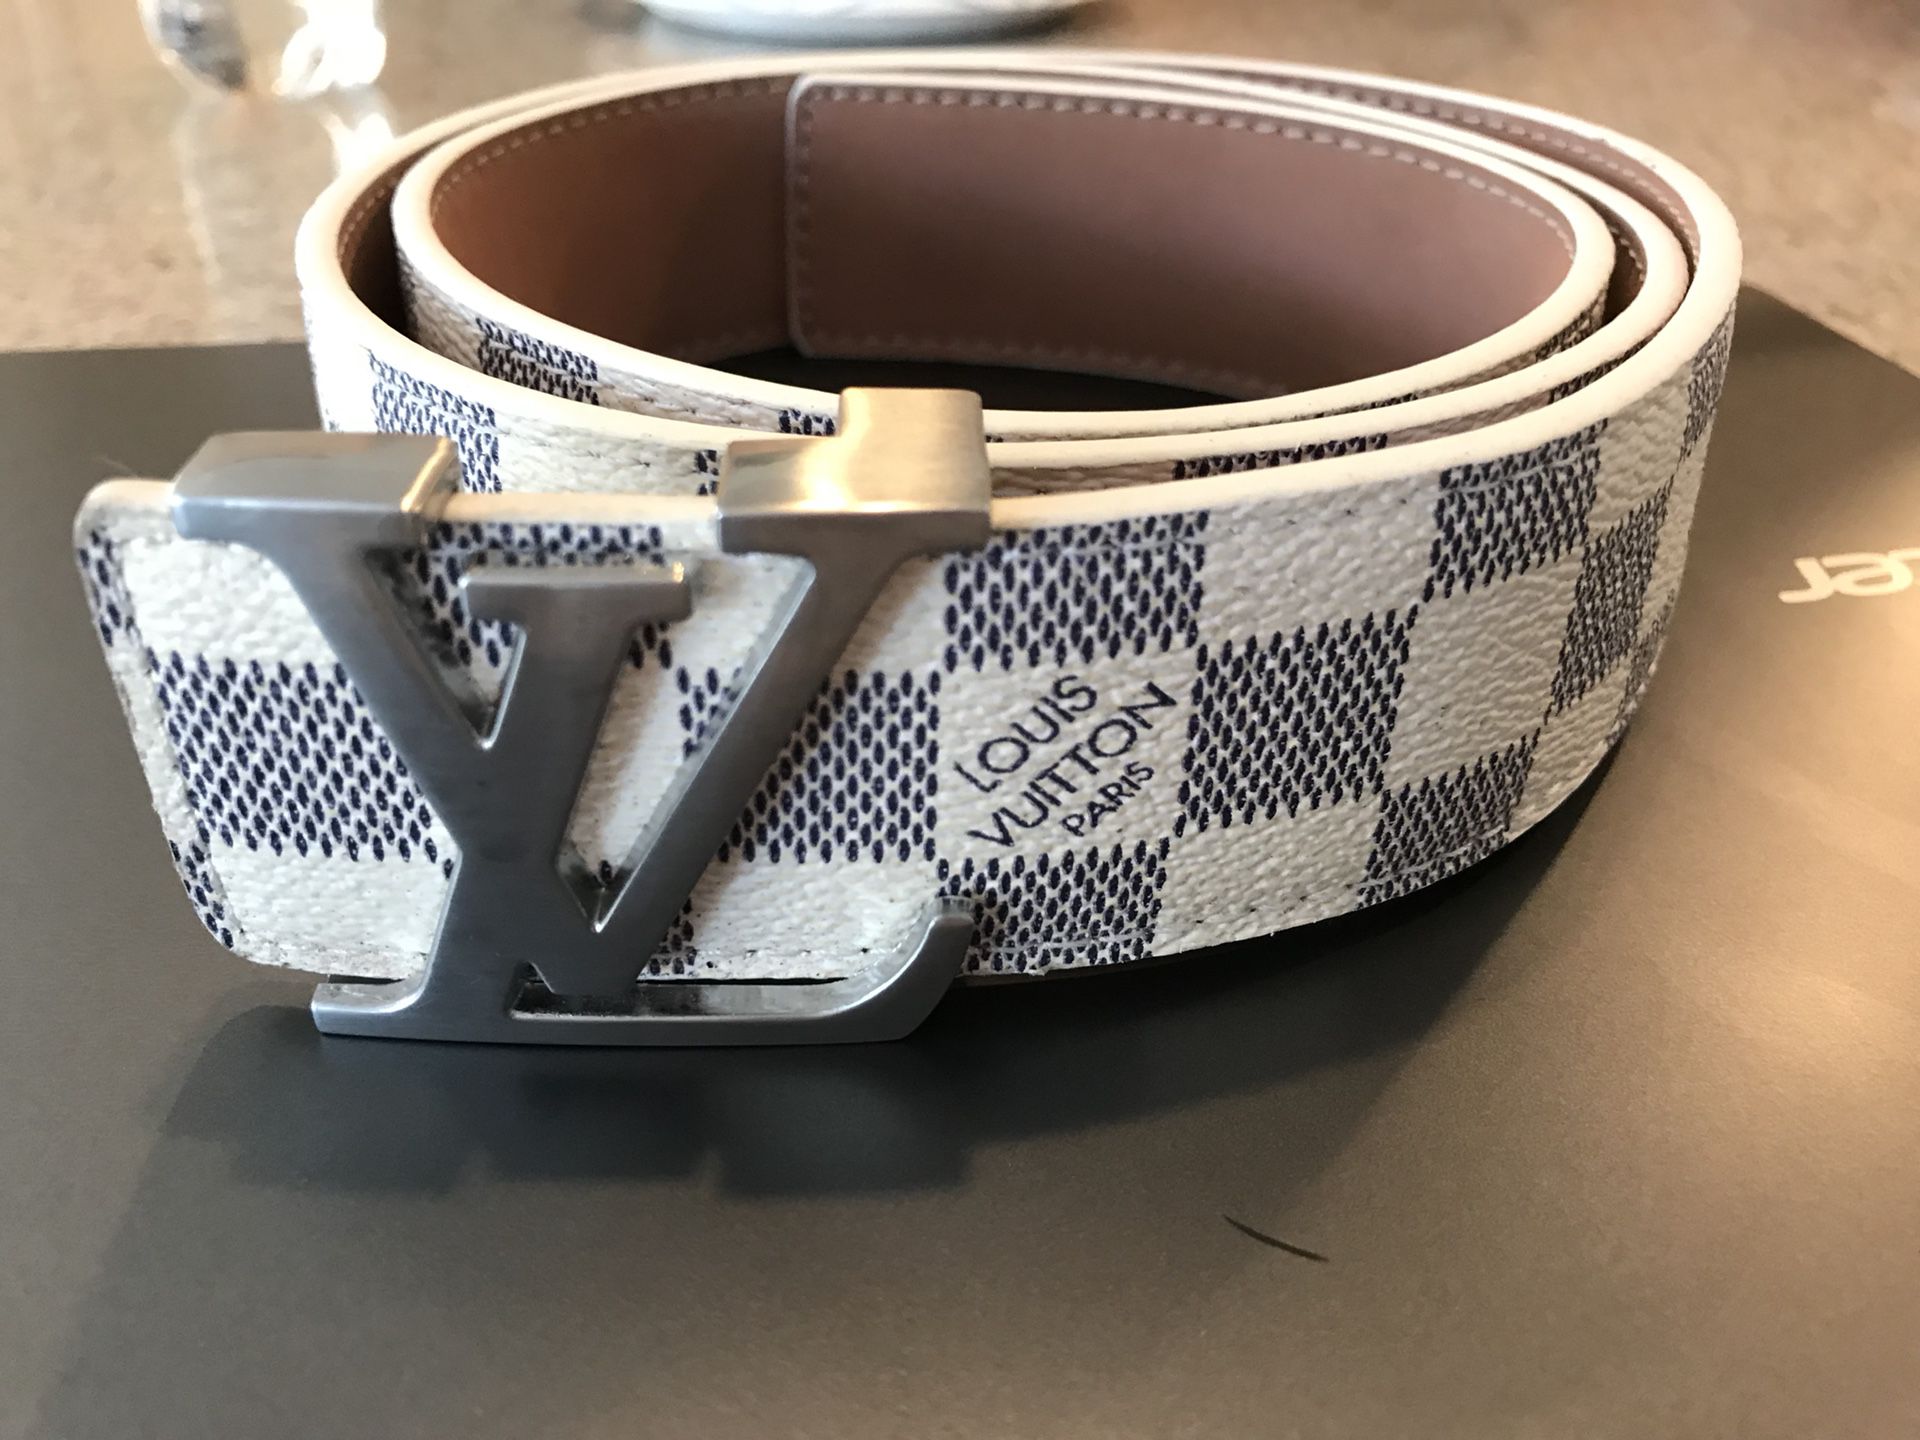 What is your opinion on the quality of Louis Vuitton (LV) belts